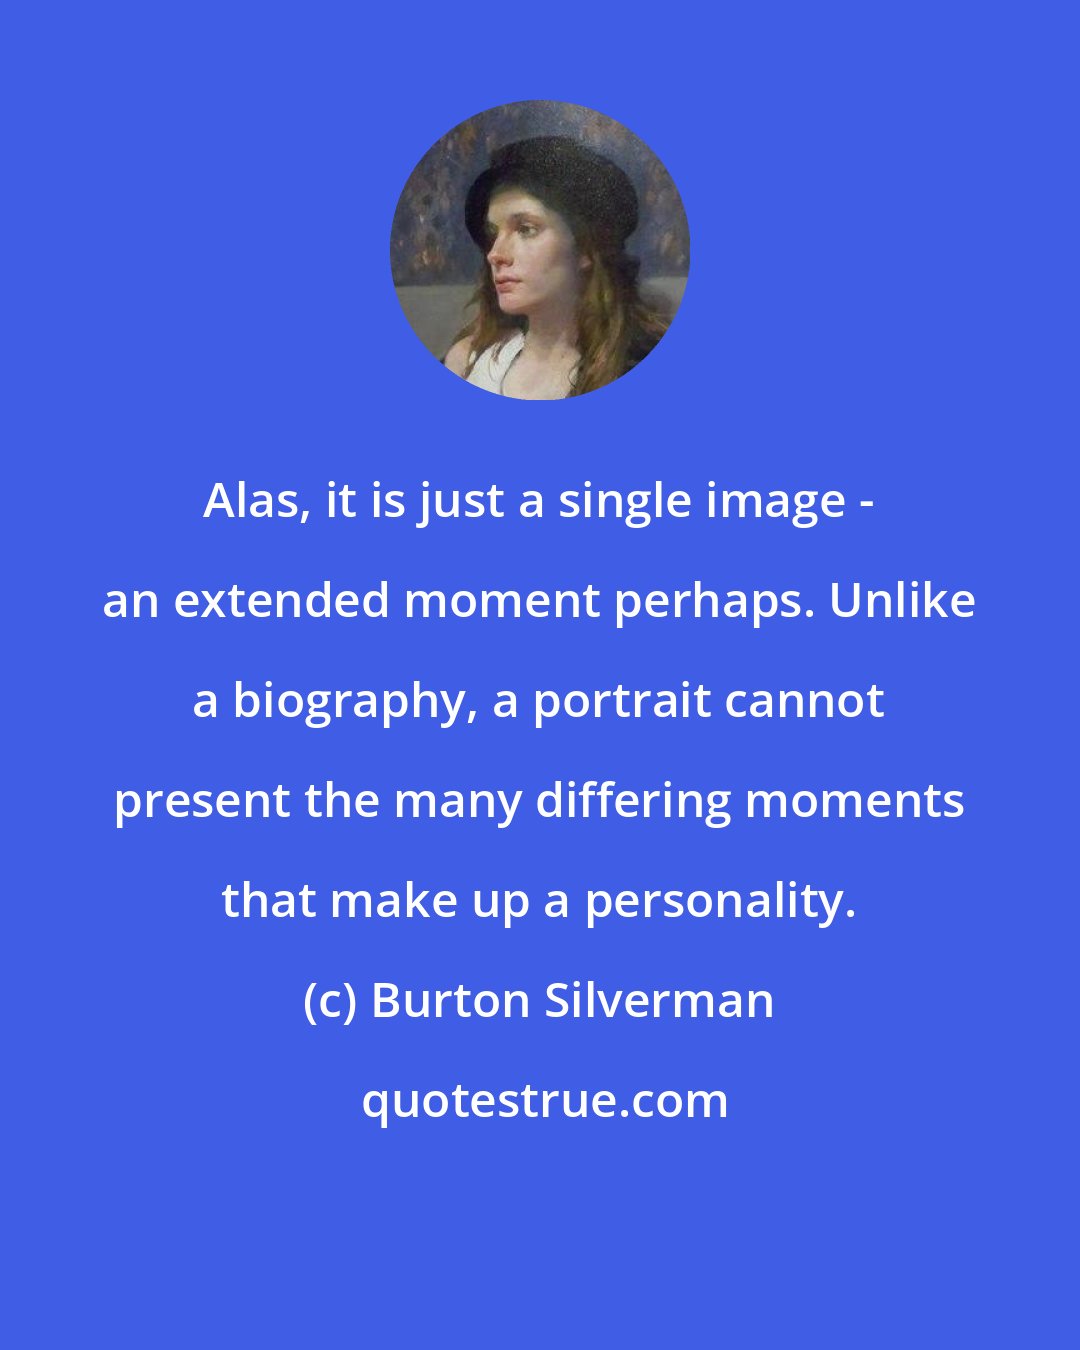 Burton Silverman: Alas, it is just a single image - an extended moment perhaps. Unlike a biography, a portrait cannot present the many differing moments that make up a personality.